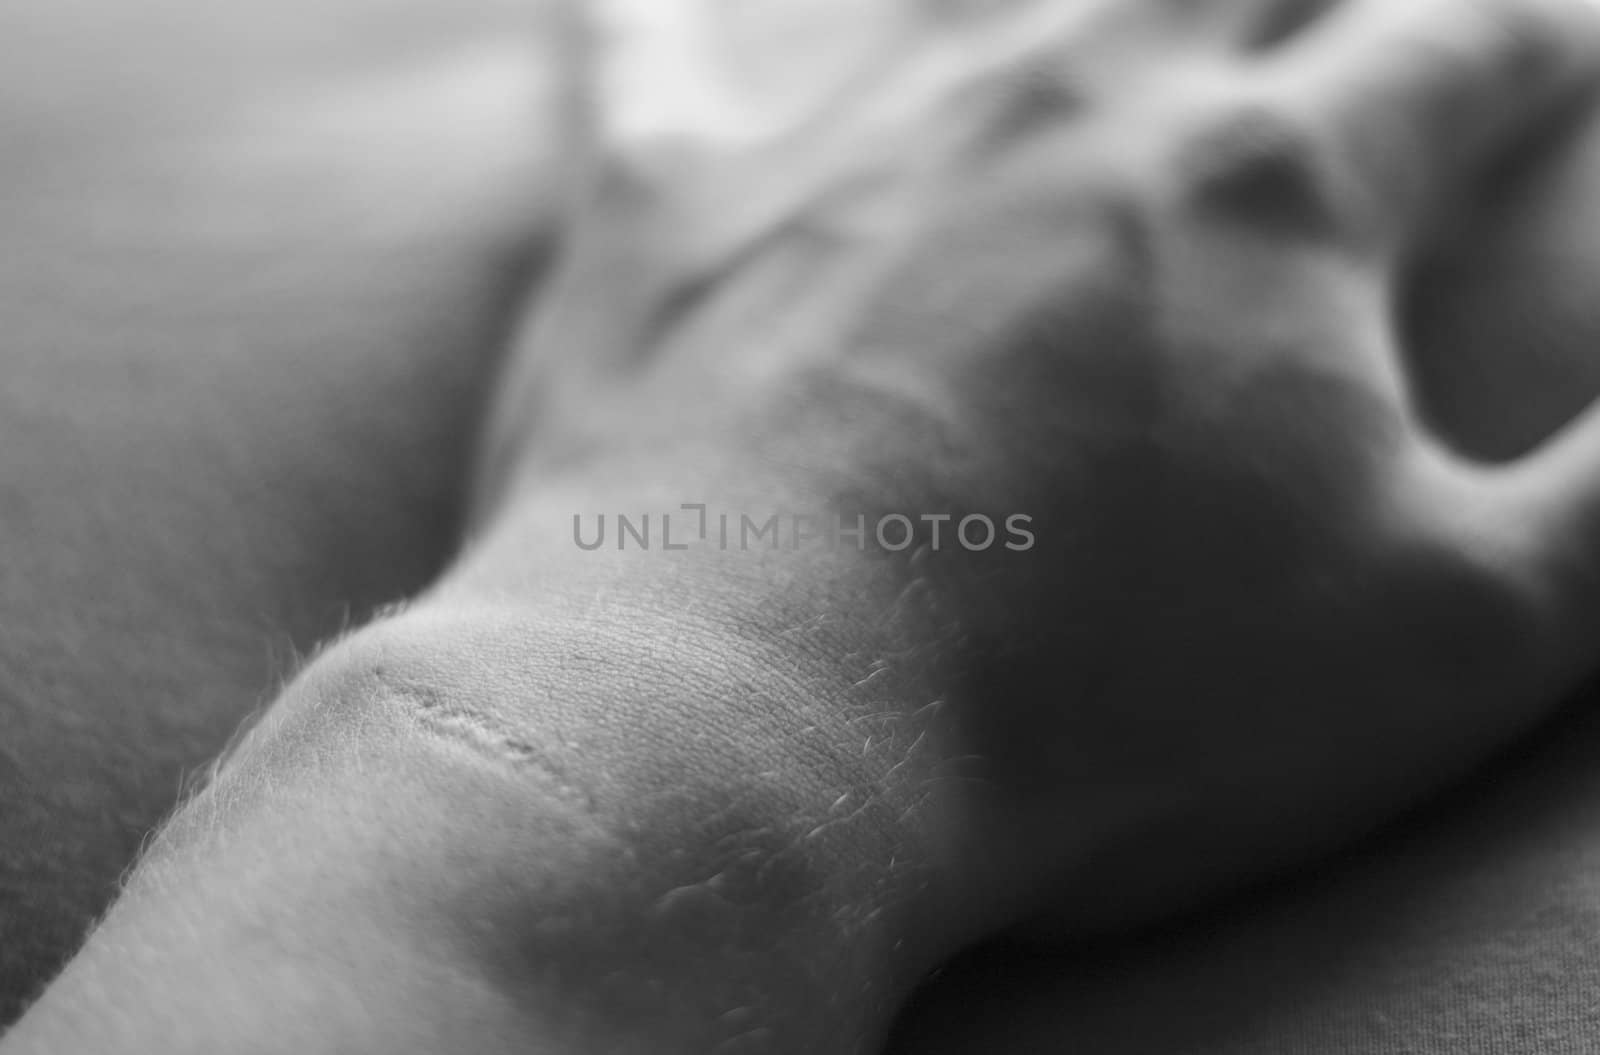 A grainy black and white image of a scarred wrist.